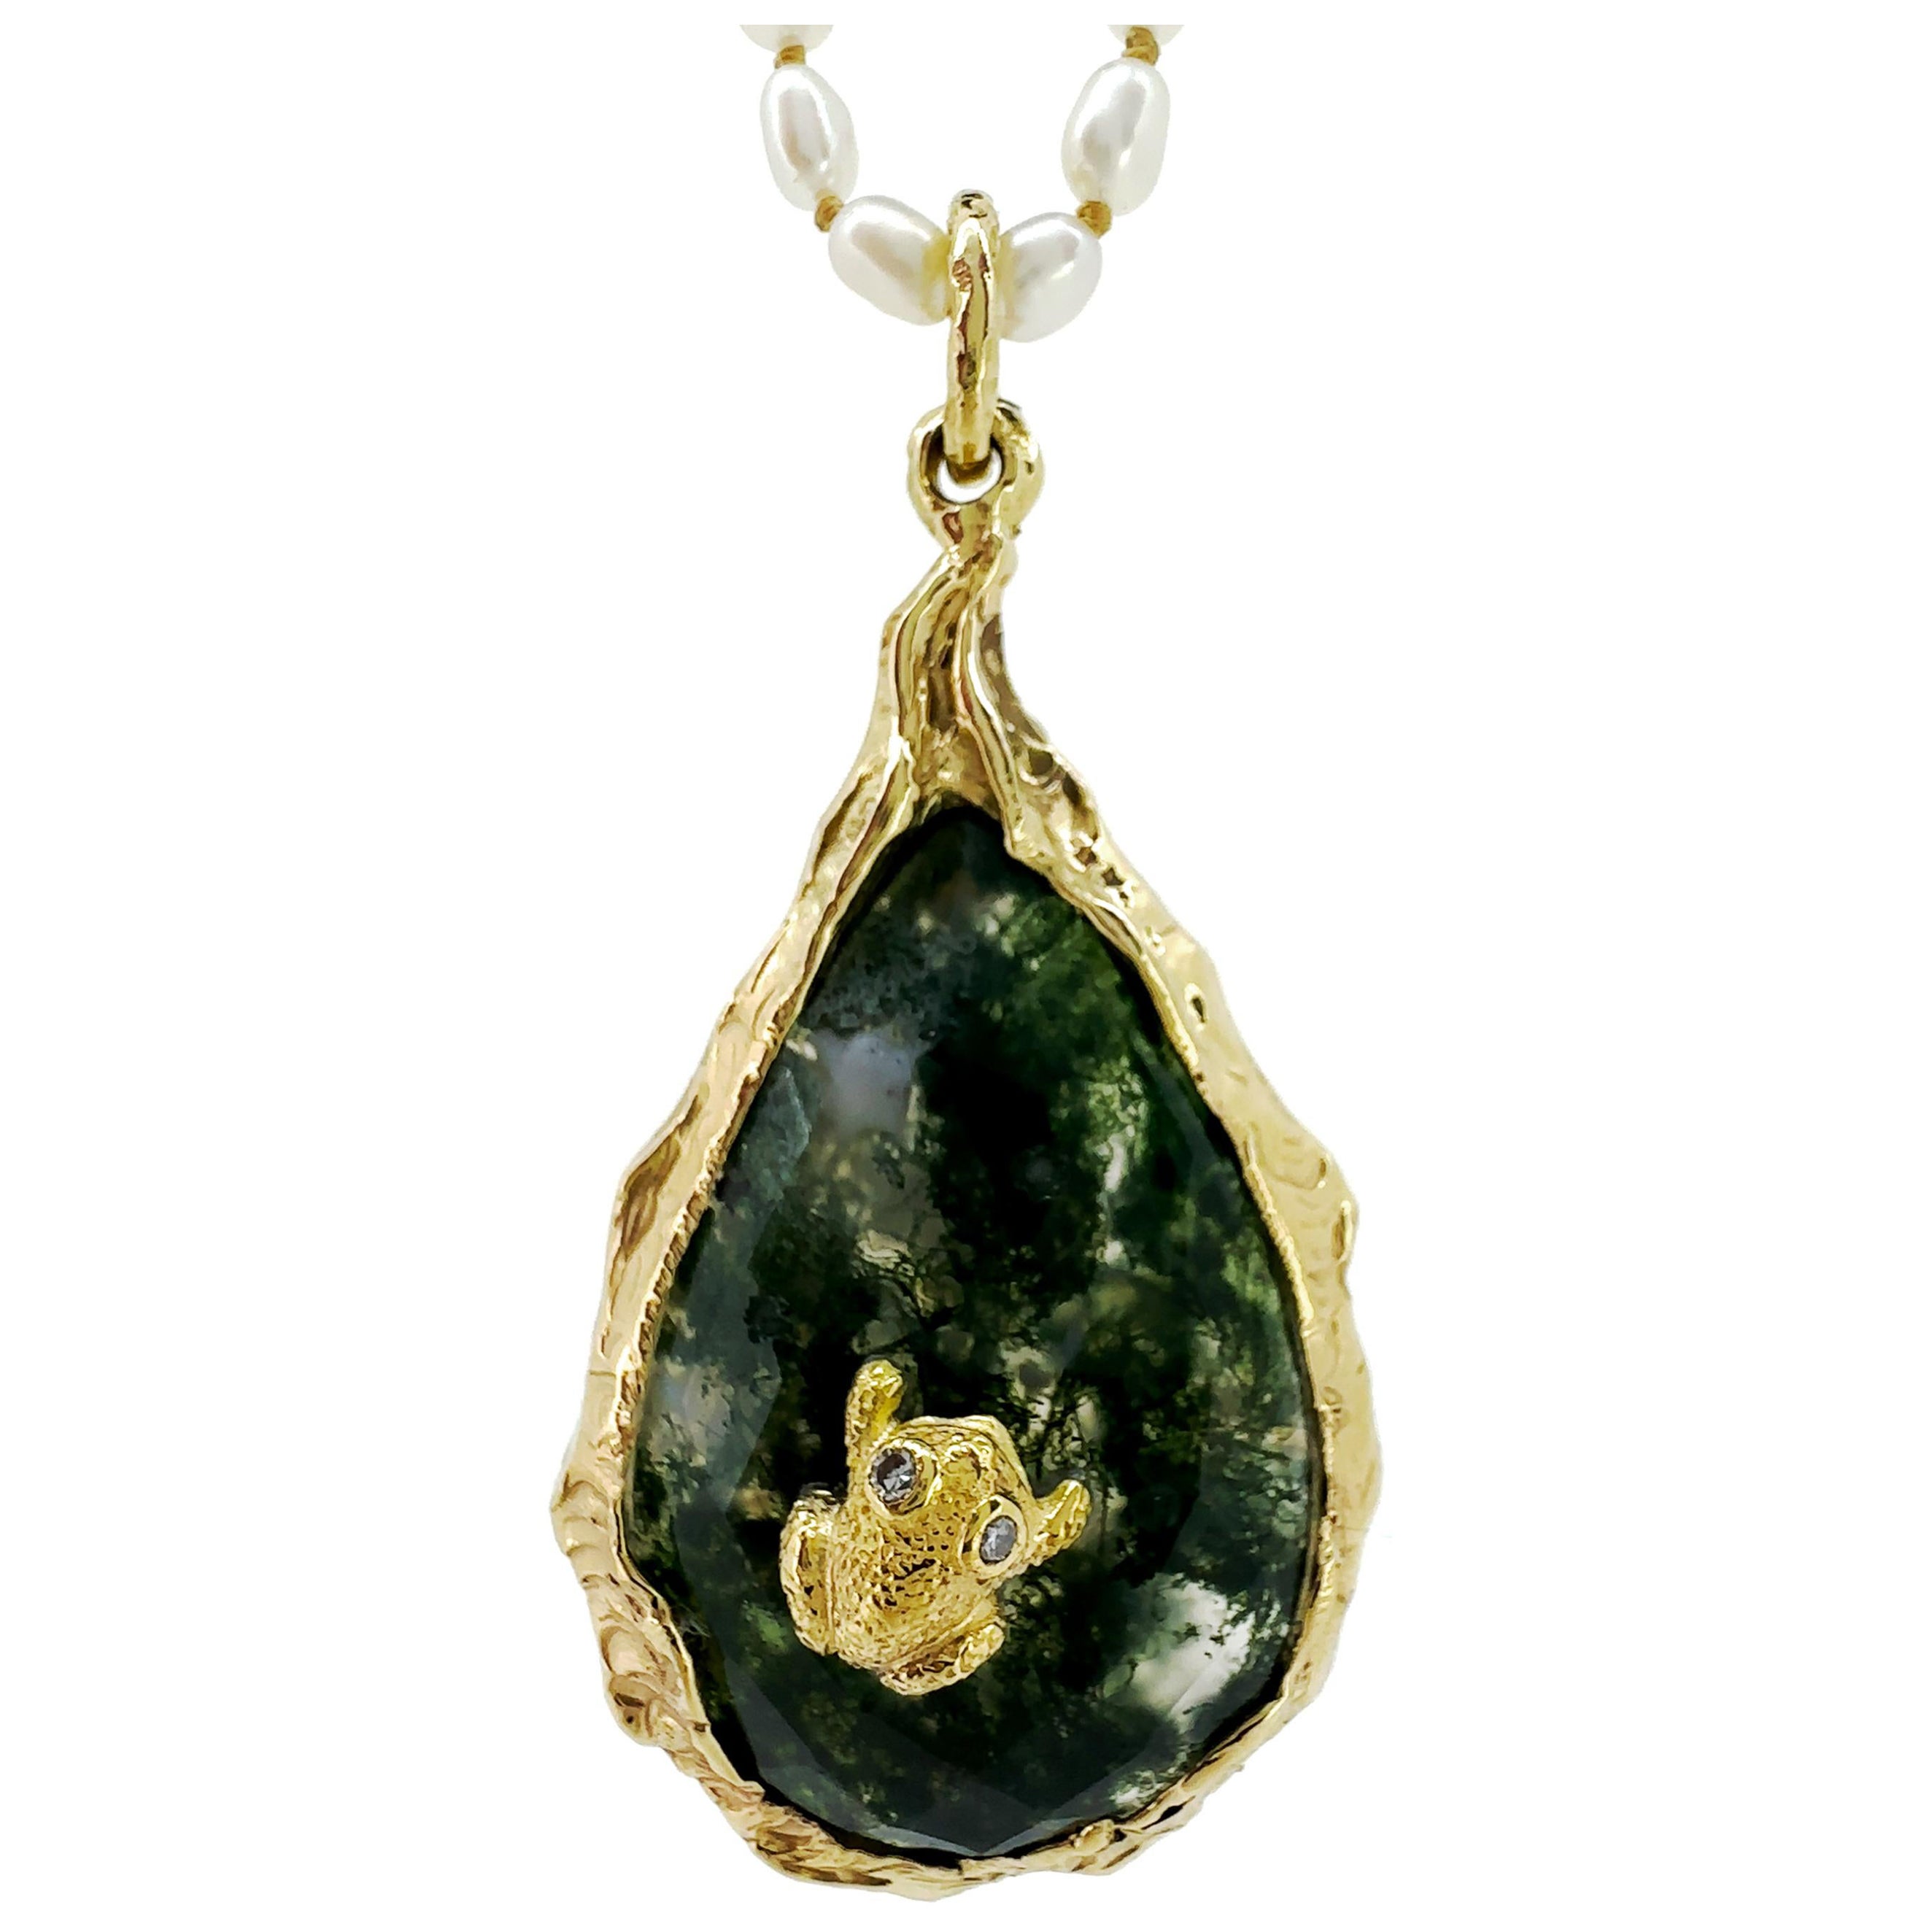 "Mossy" Large Teardrop Pendant in Yellow Gold with Tiny Frog on Moss Agate  For Sale